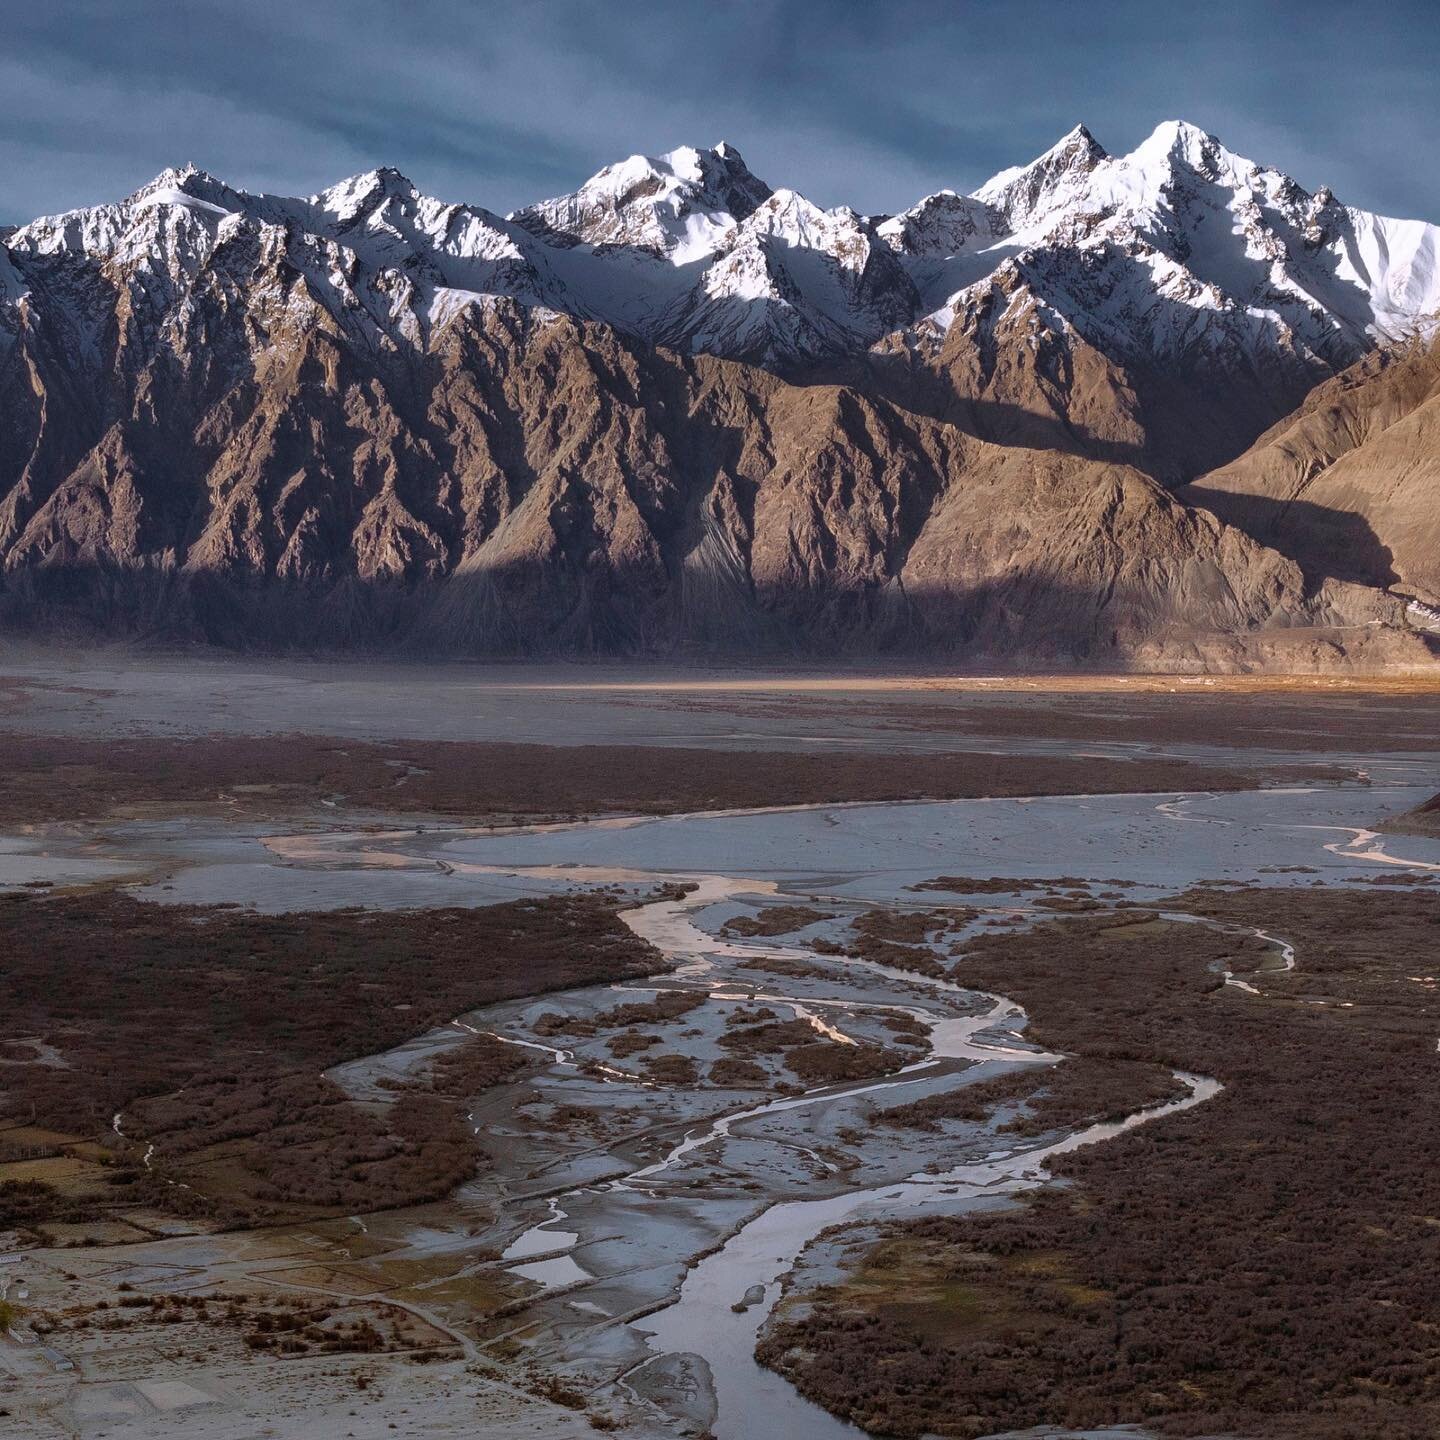 Karakoram - where India, Pakistan, and China meet these peaks tear out of the river beds in a stunning geologic display not quite like any else on earth. Truly one of the most fearsome and awe-inspiring landscapes I&rsquo;ve had the fortune of leavin